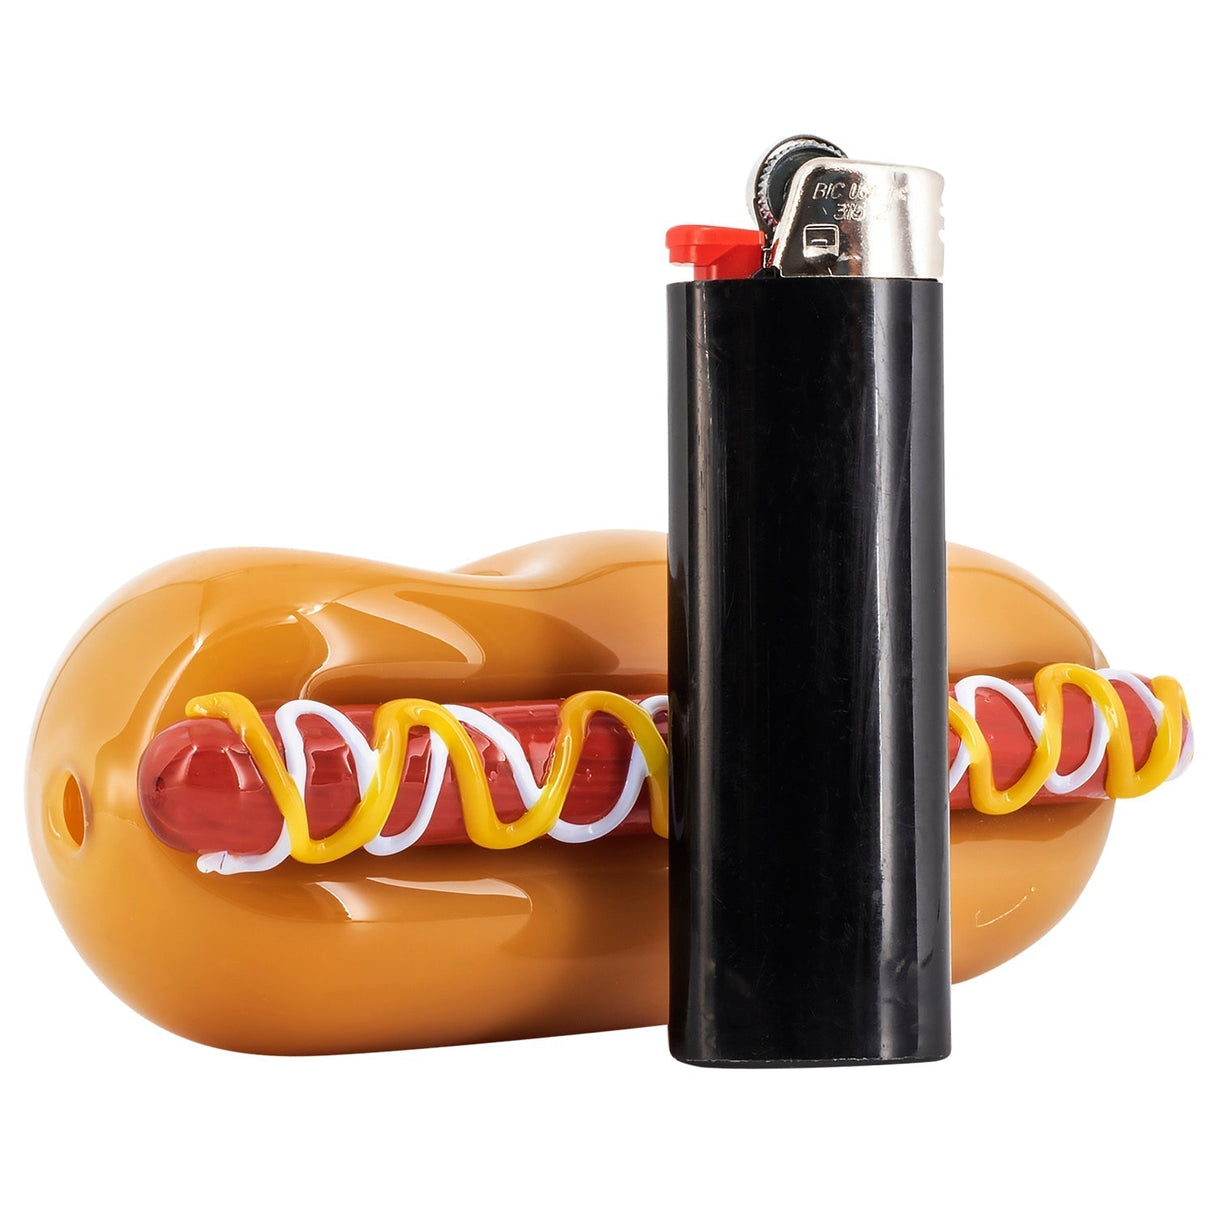 LA Pipes Hot Doggy Dog Hand Pipe in Assorted Colors - Side View with Lighter